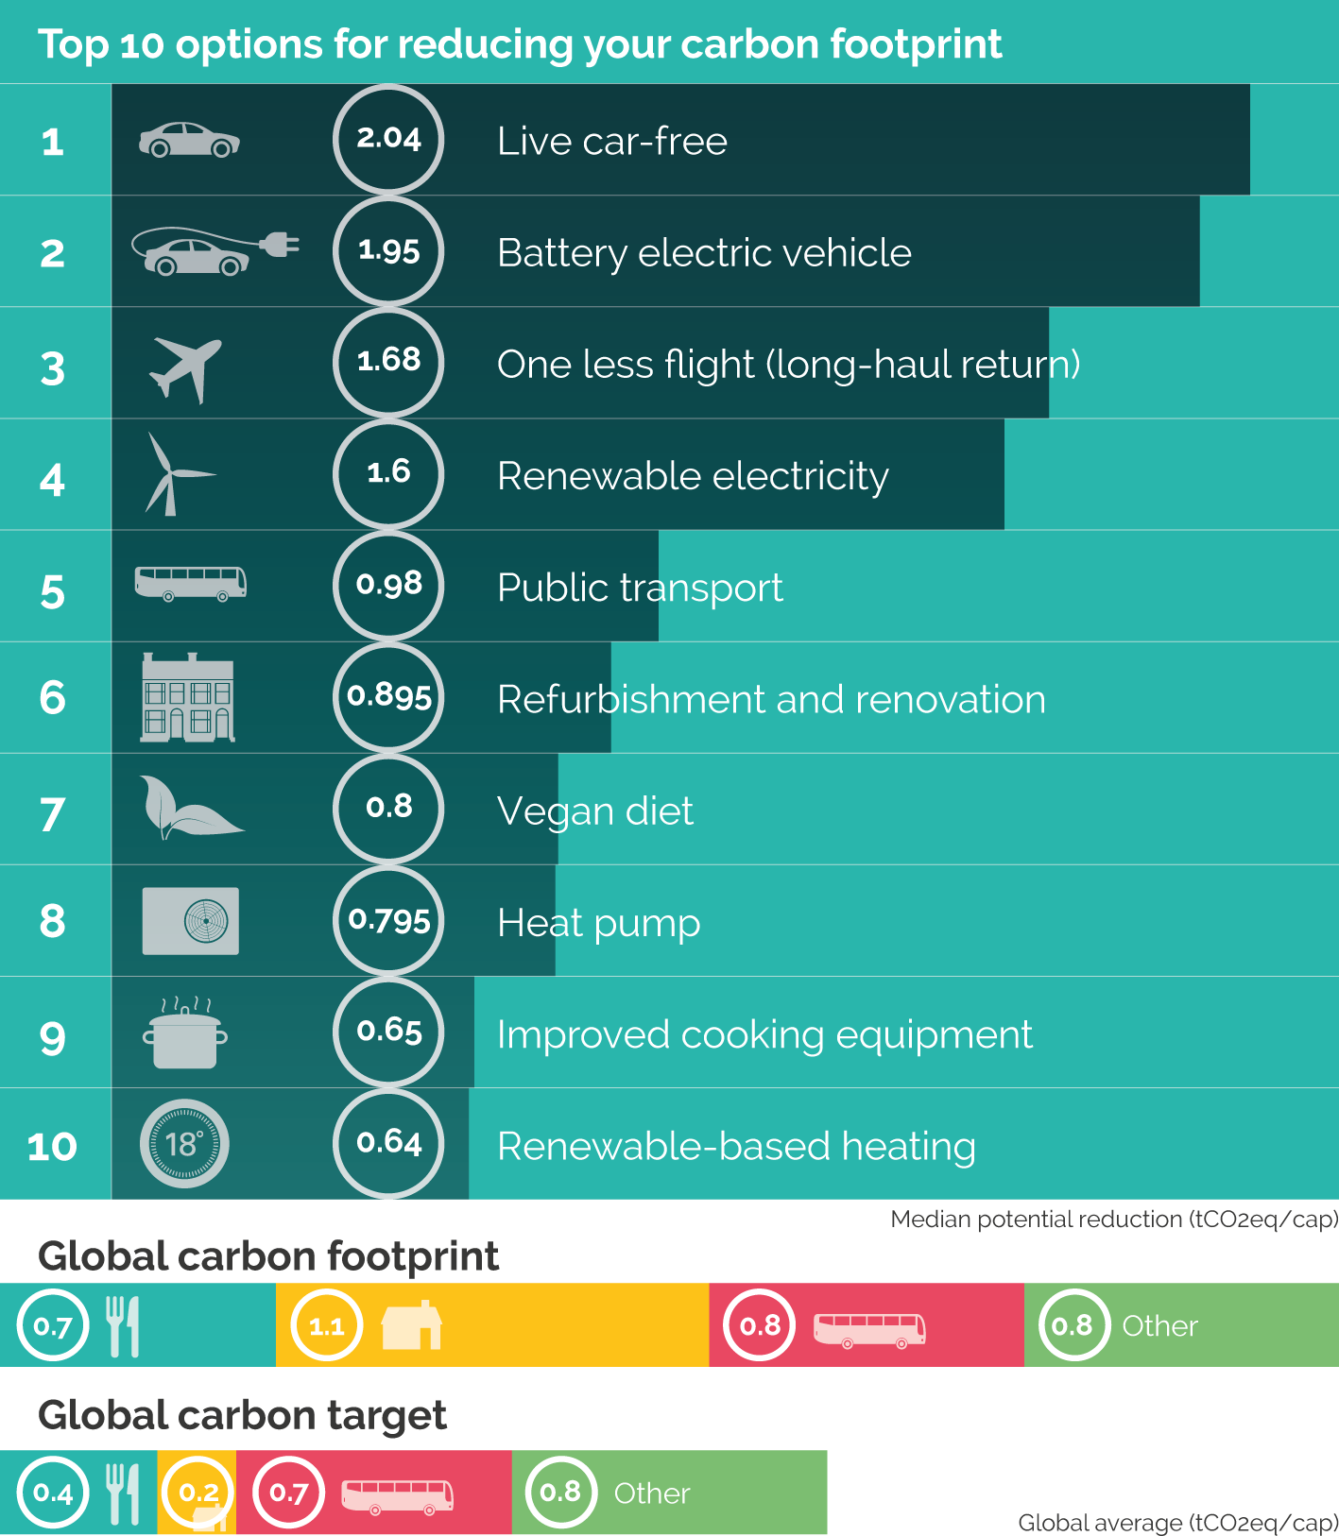 A figure illustrating the most viable options for reducing your carbon footprint cover a range of options, from living car-free to installing renewable energy-based heating.